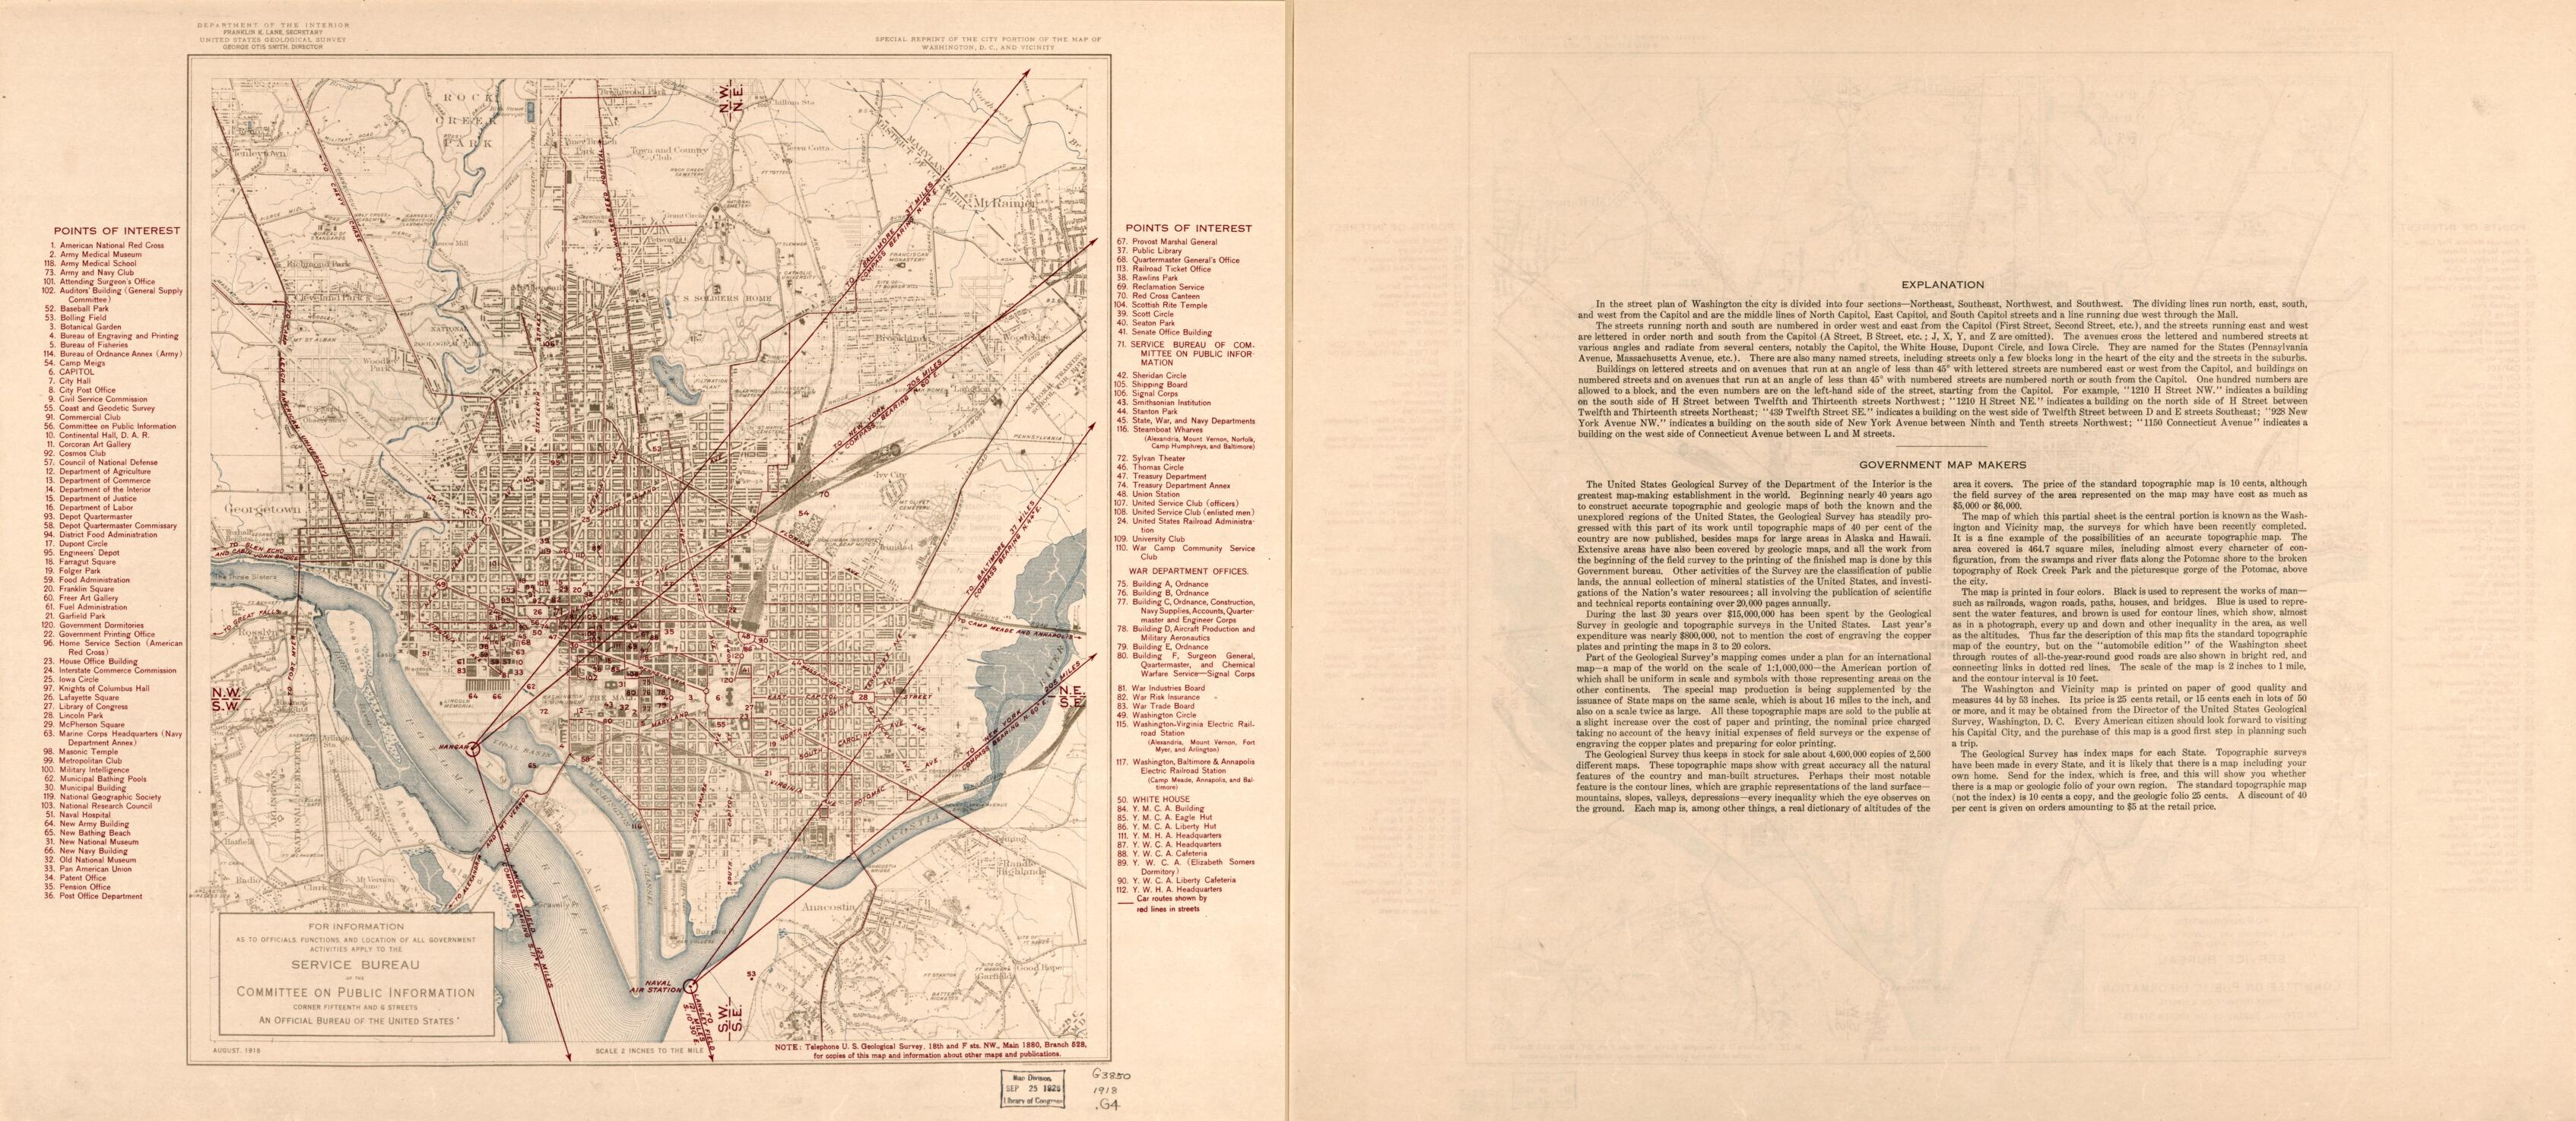 This old map of Special Reprint of the City Portion of the Map of Washington, D.C., and Vicinity from 1918 was created by  Geological Survey (U.S.) in 1918